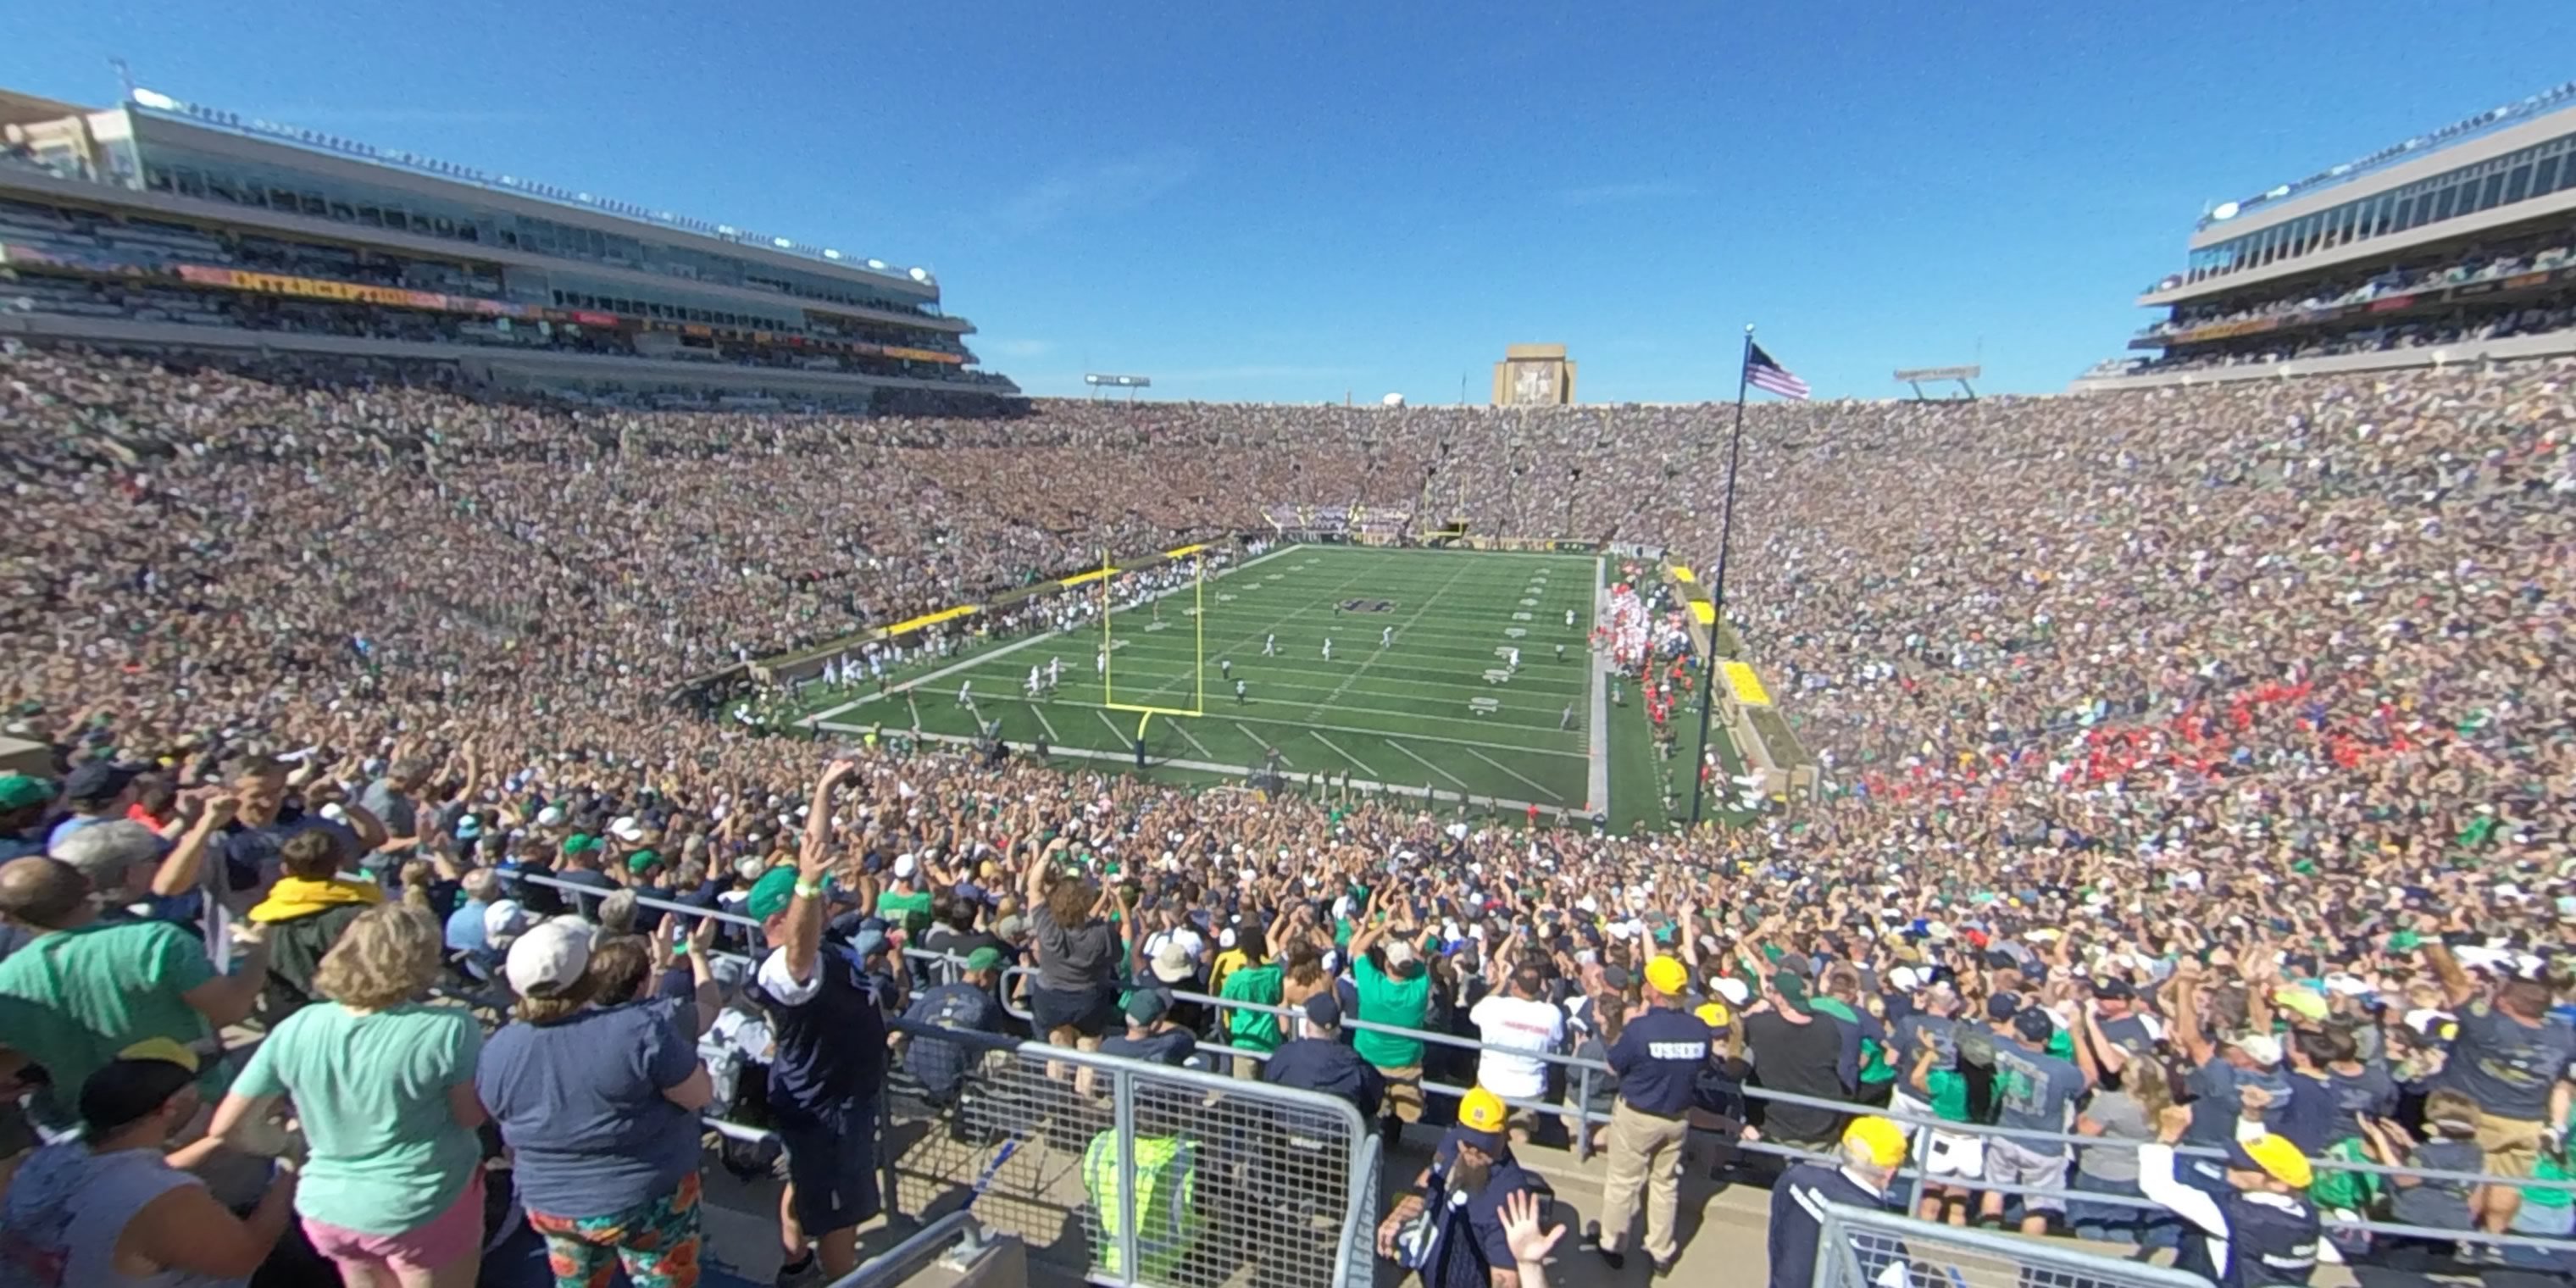 section 117 panoramic seat view  - notre dame stadium